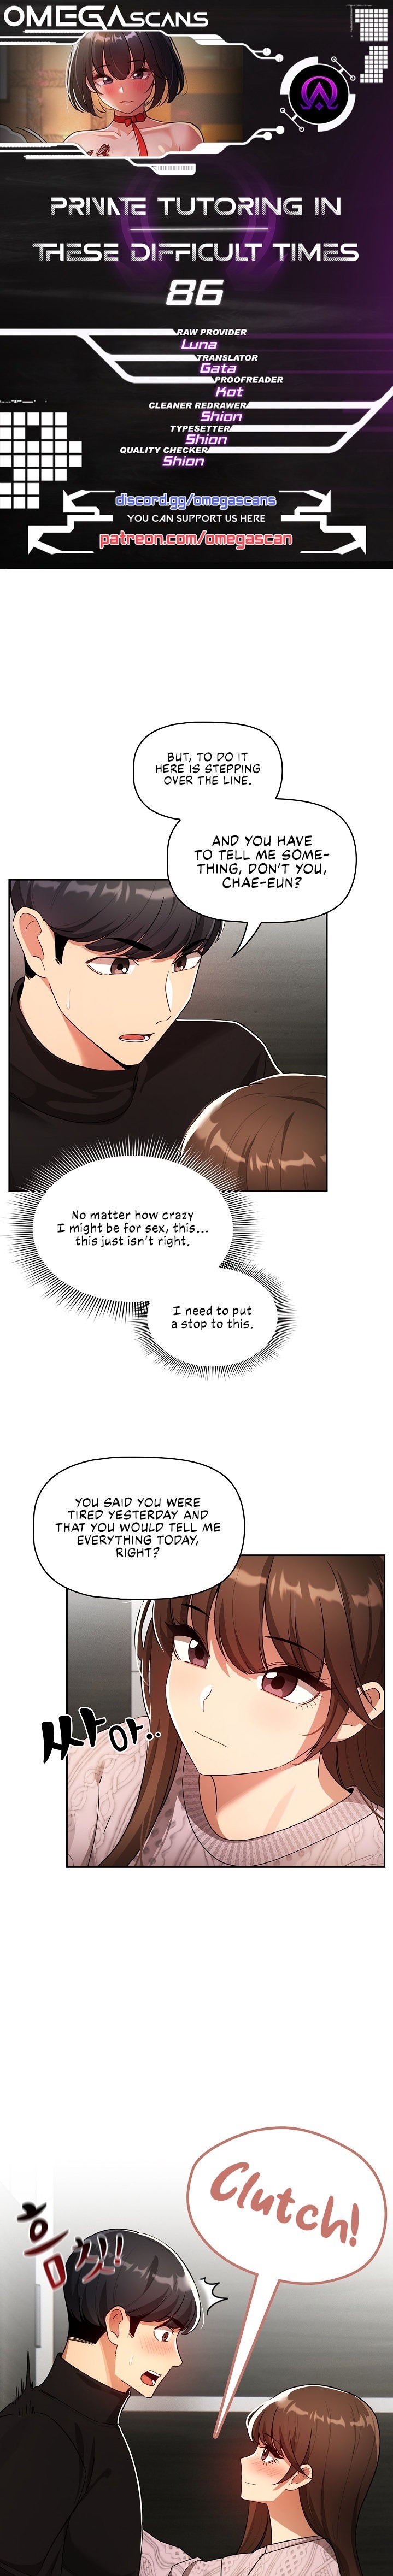 Private Tutoring in These Trying Times - Chapter 86 Page 1